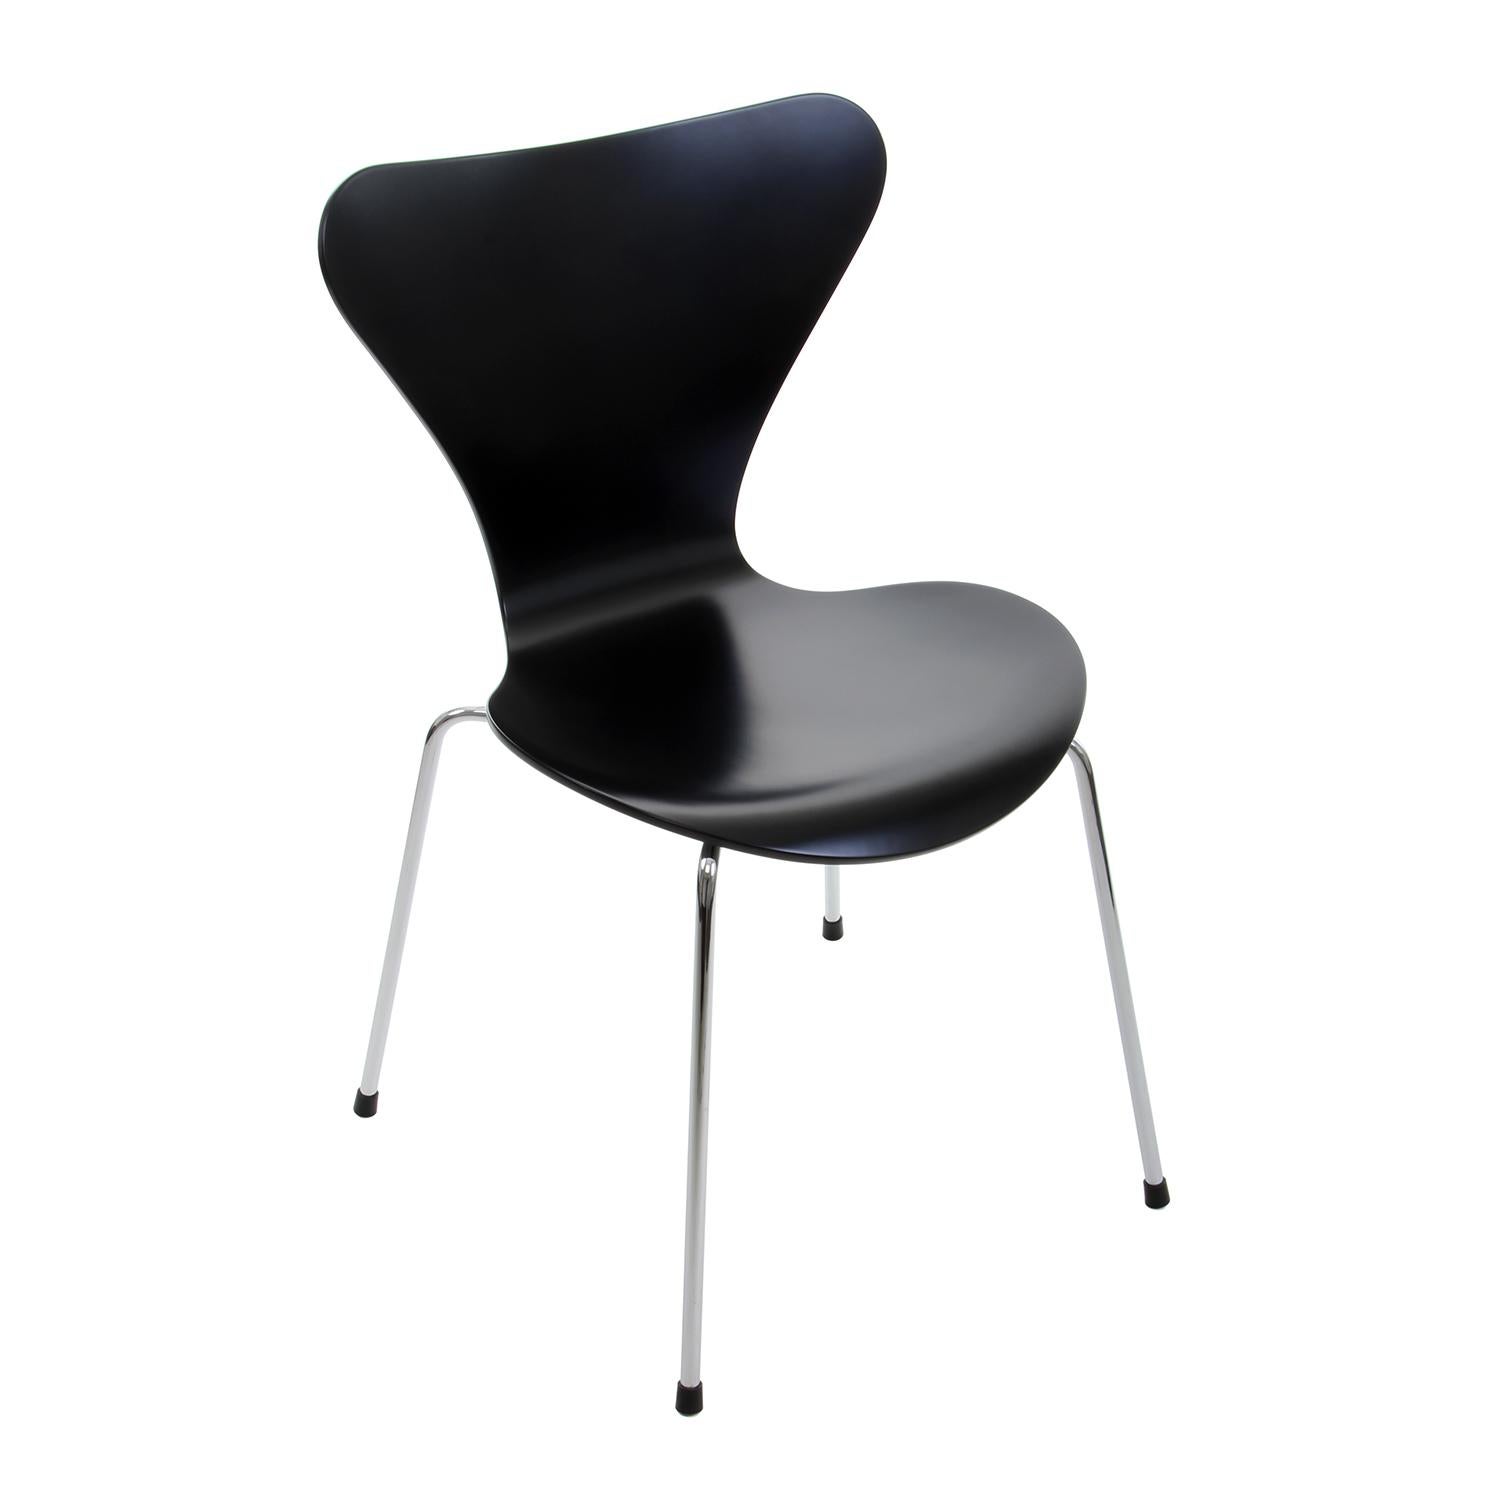 We have 6 of these iconic chairs in black lacquer finish.

We have 6 original vintage (labeled production year 1995) Series 7 chairs, fully restored and re-lacquered in a silk semi-gloss black finish - done by the premiere furniture lacquering